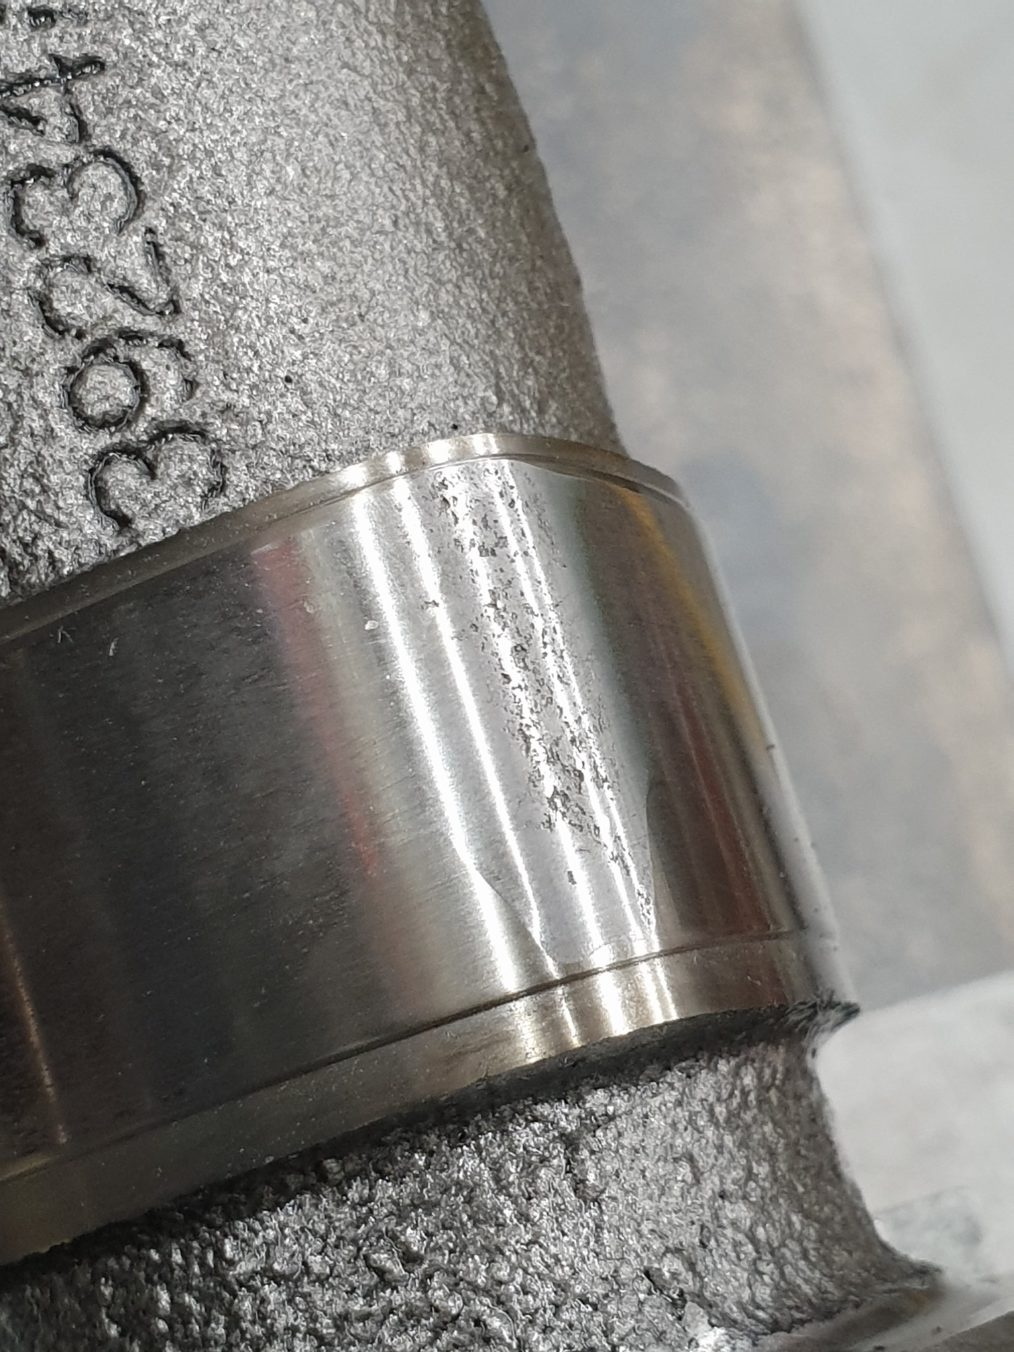 Pitted lobe on camshaft